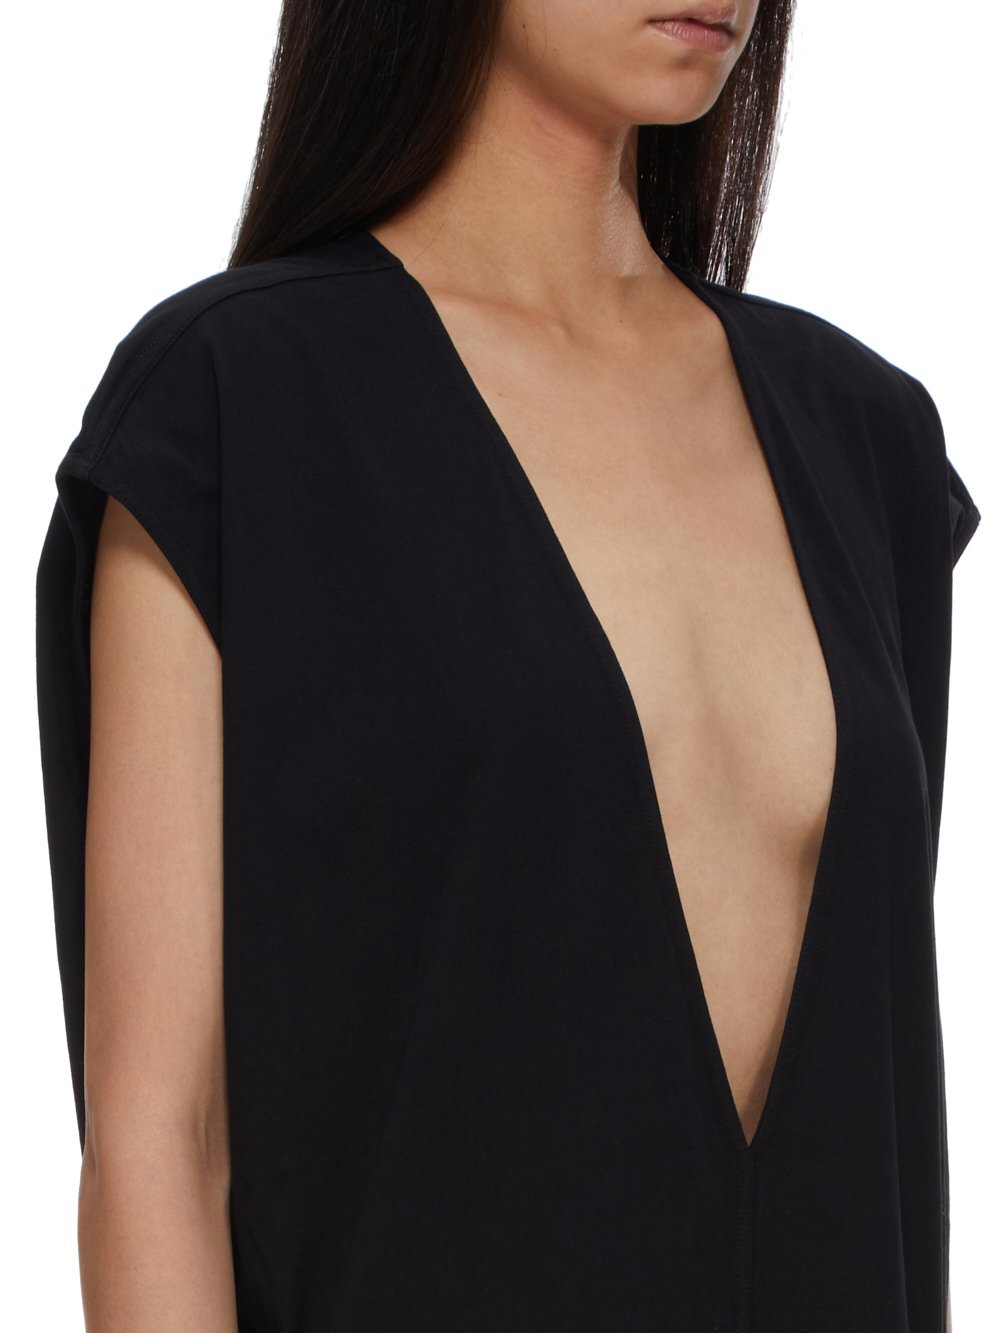 RICK OWENS FW23 LUXOR ARROWHEAD GOWN IN BLACK CLASSIC COTTON JERSEY